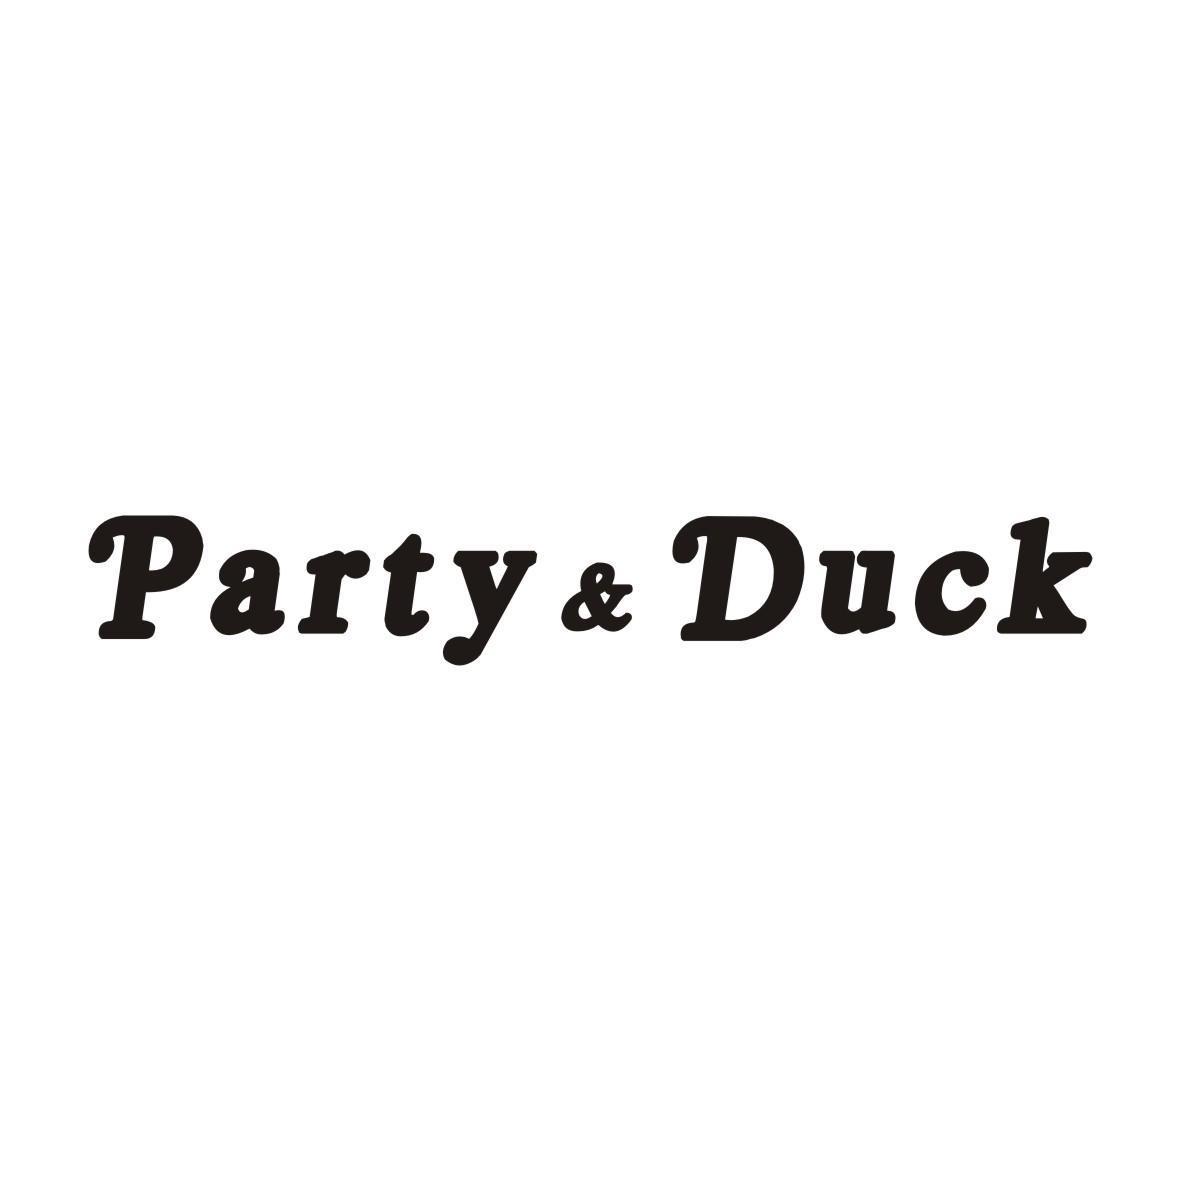 PARTY & DUCK